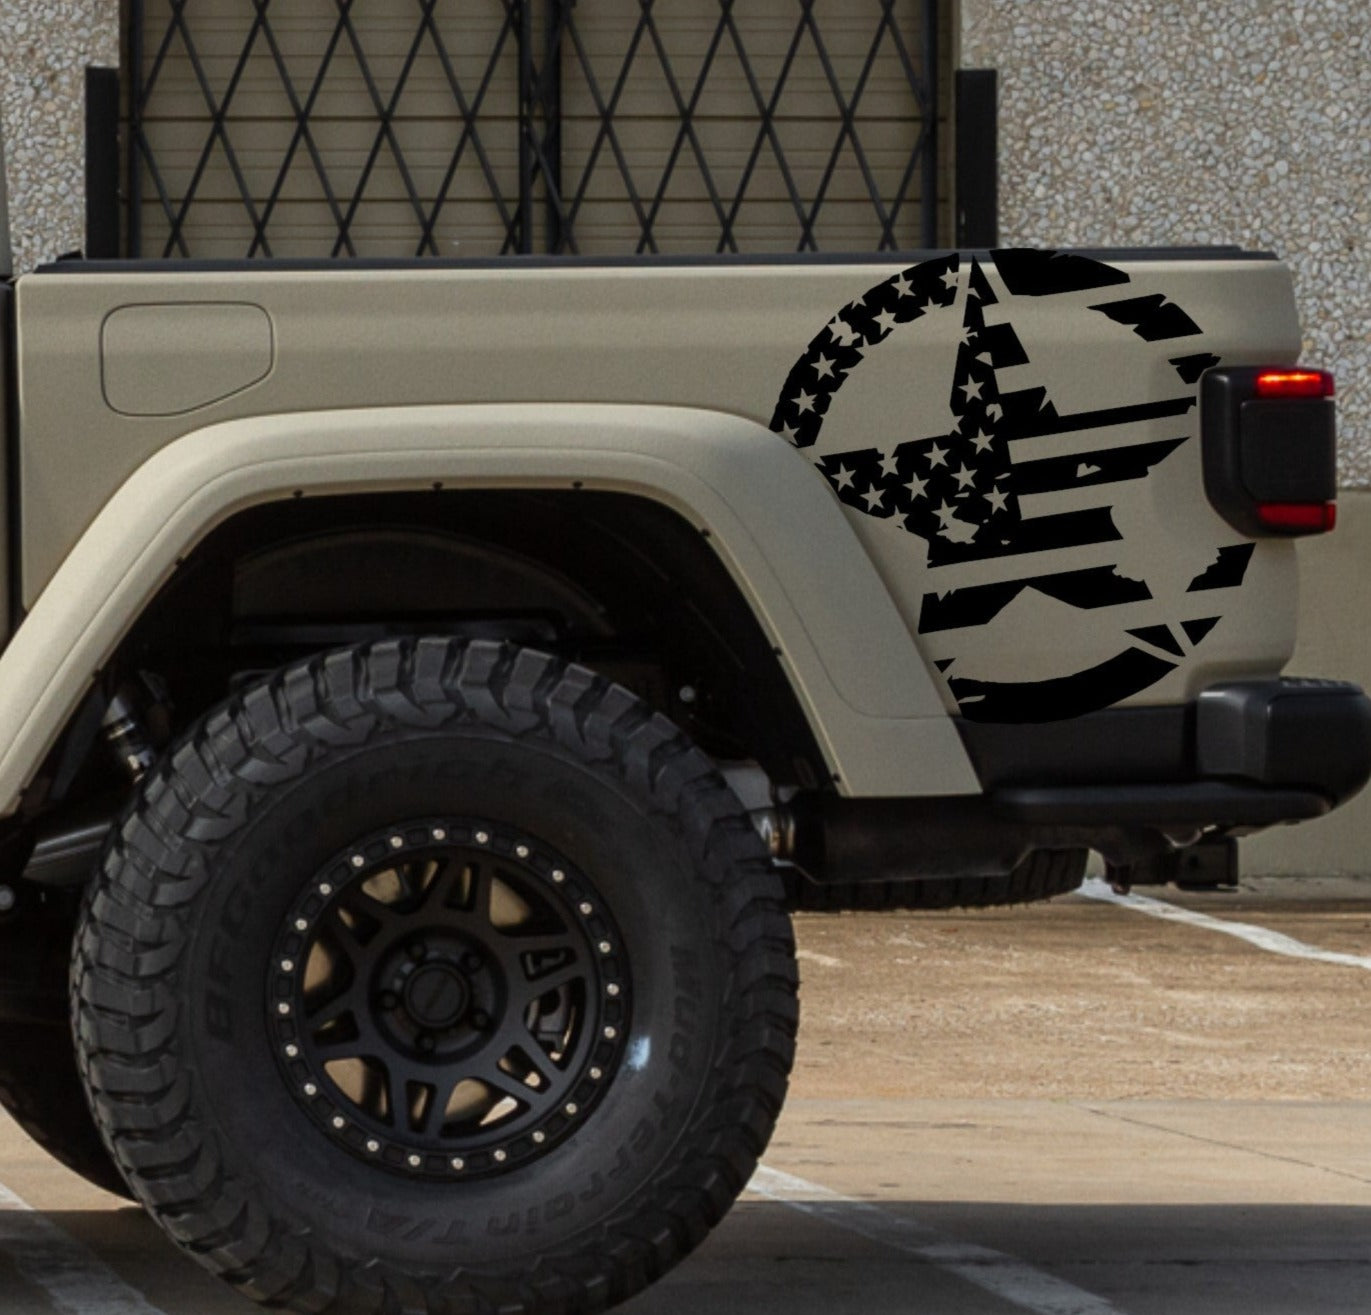 Jeep Gladiator Decal Gladiator Truck Bed Side American Flag Military Star Decal Stickers